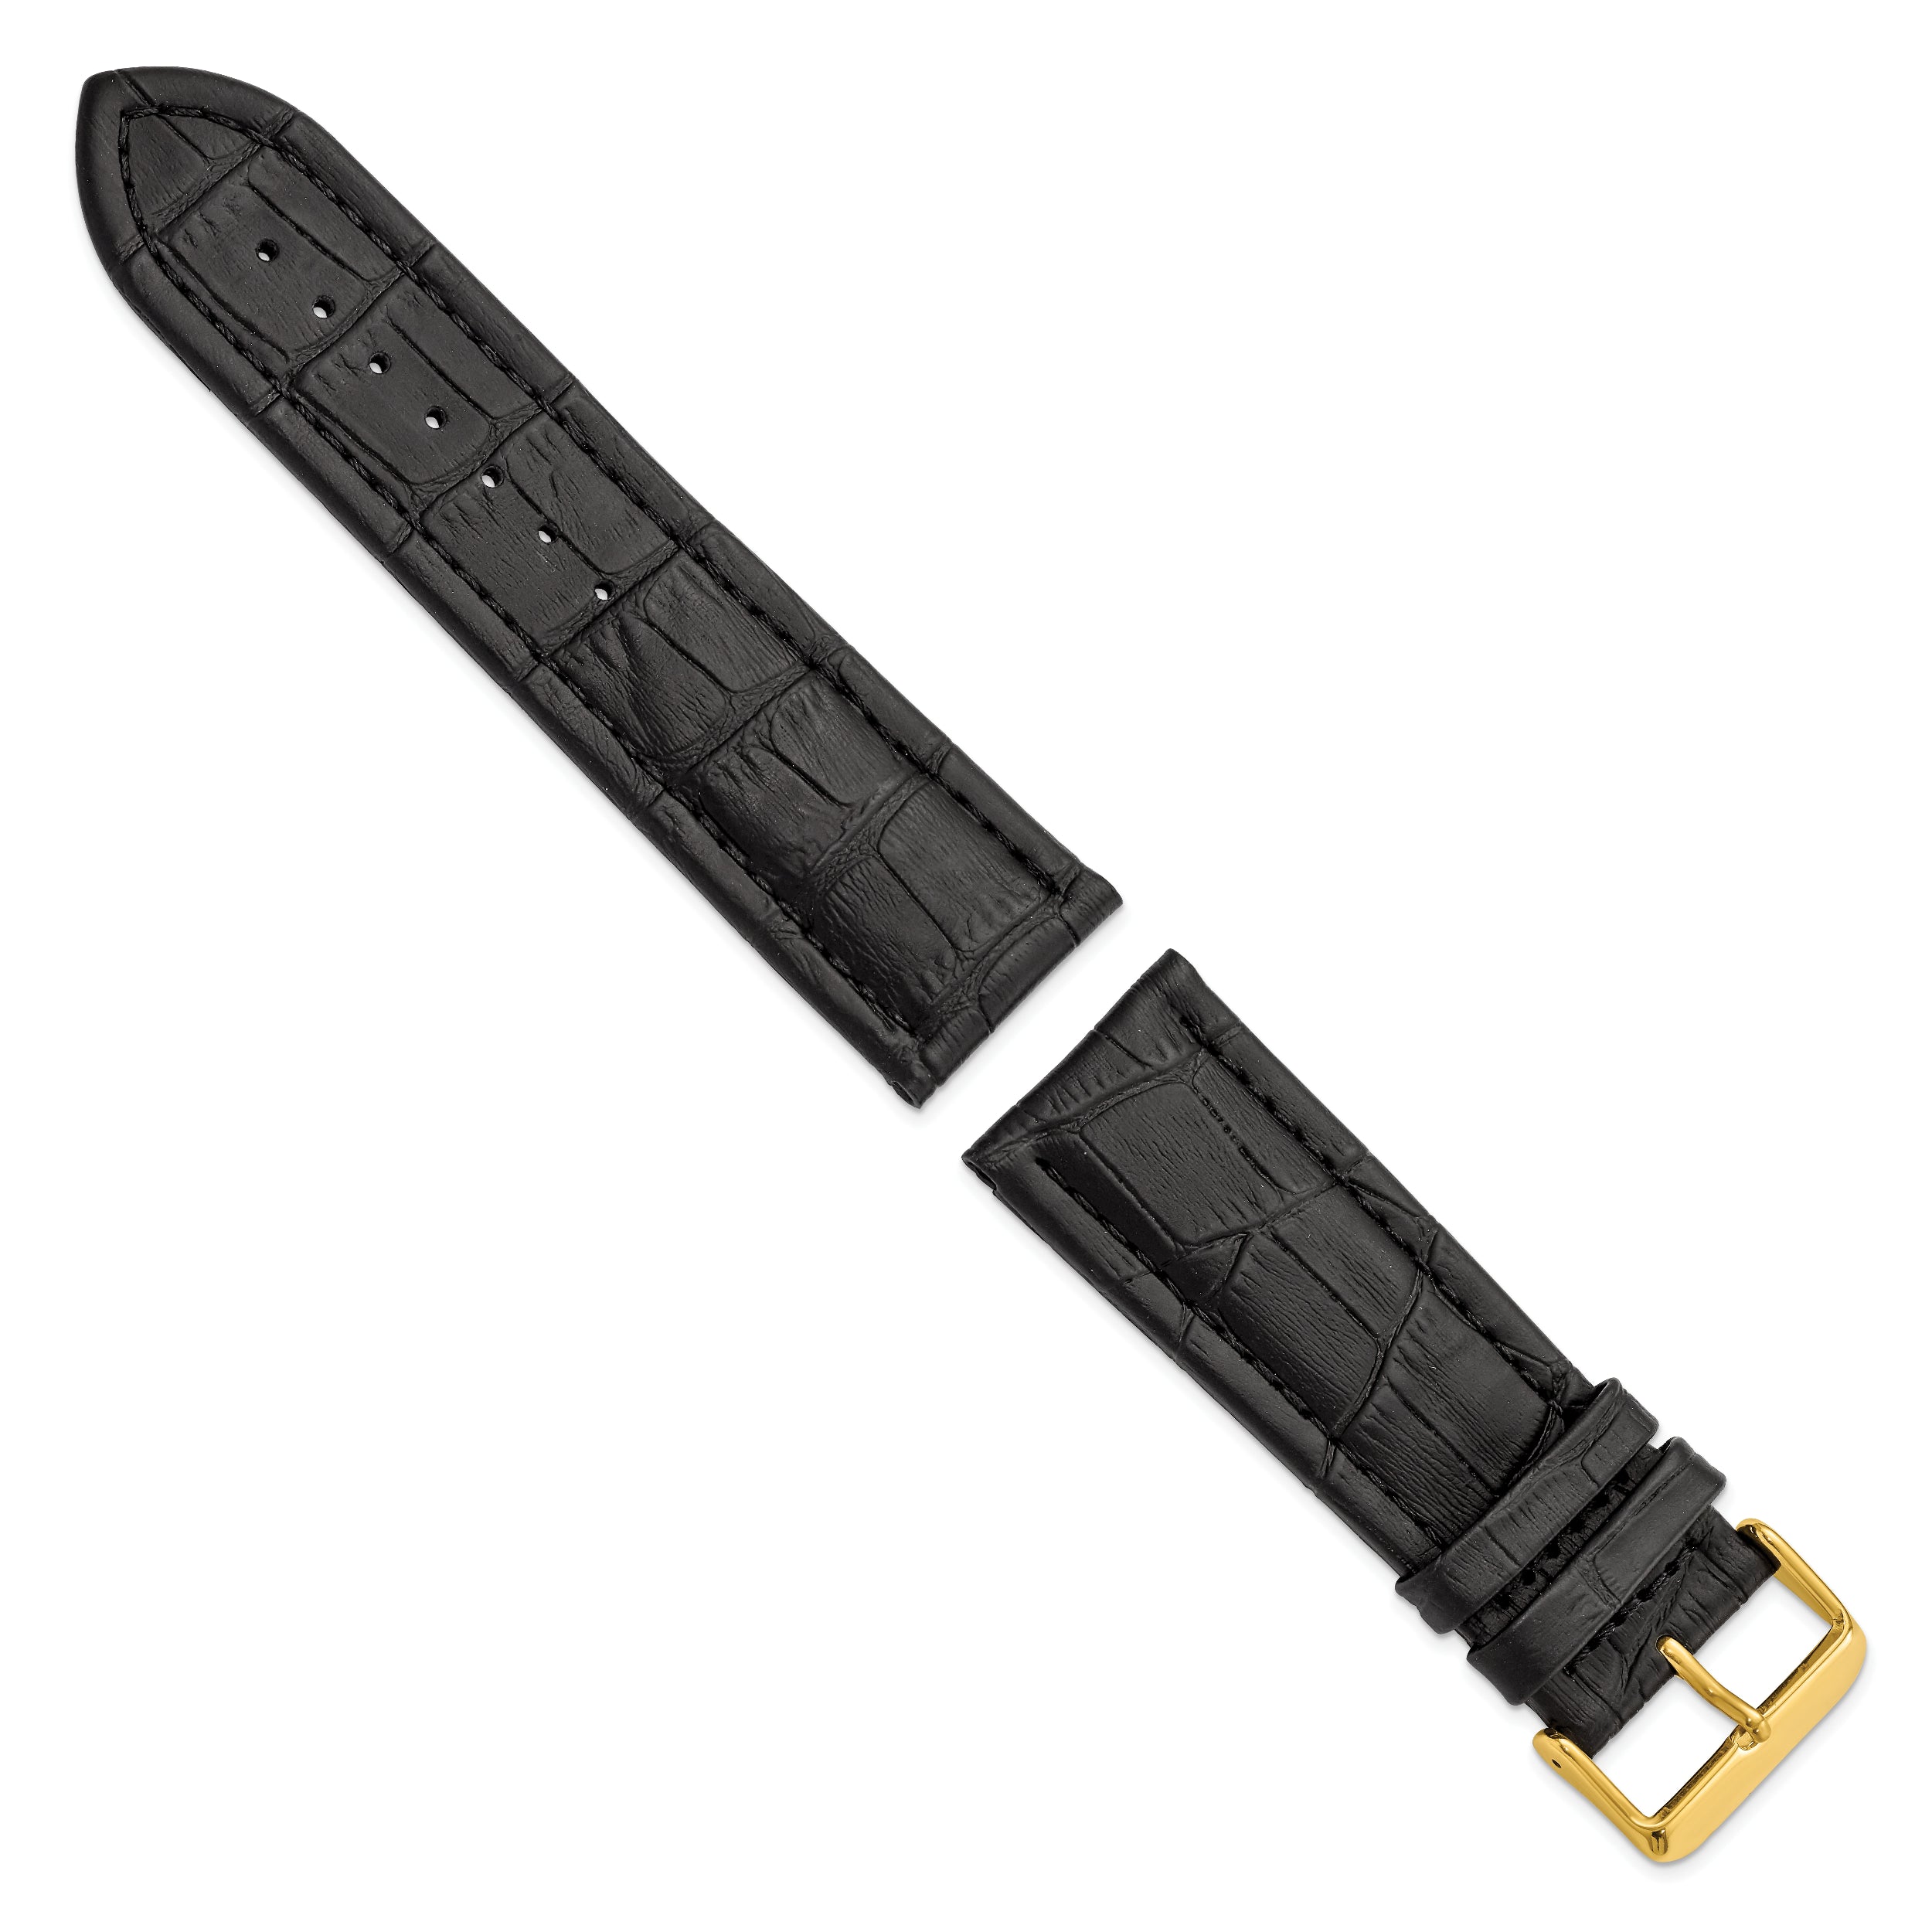 14mm Black Matte Alligator Grain Leather with Gold-tone Buckle 6.75 inch Watch Band